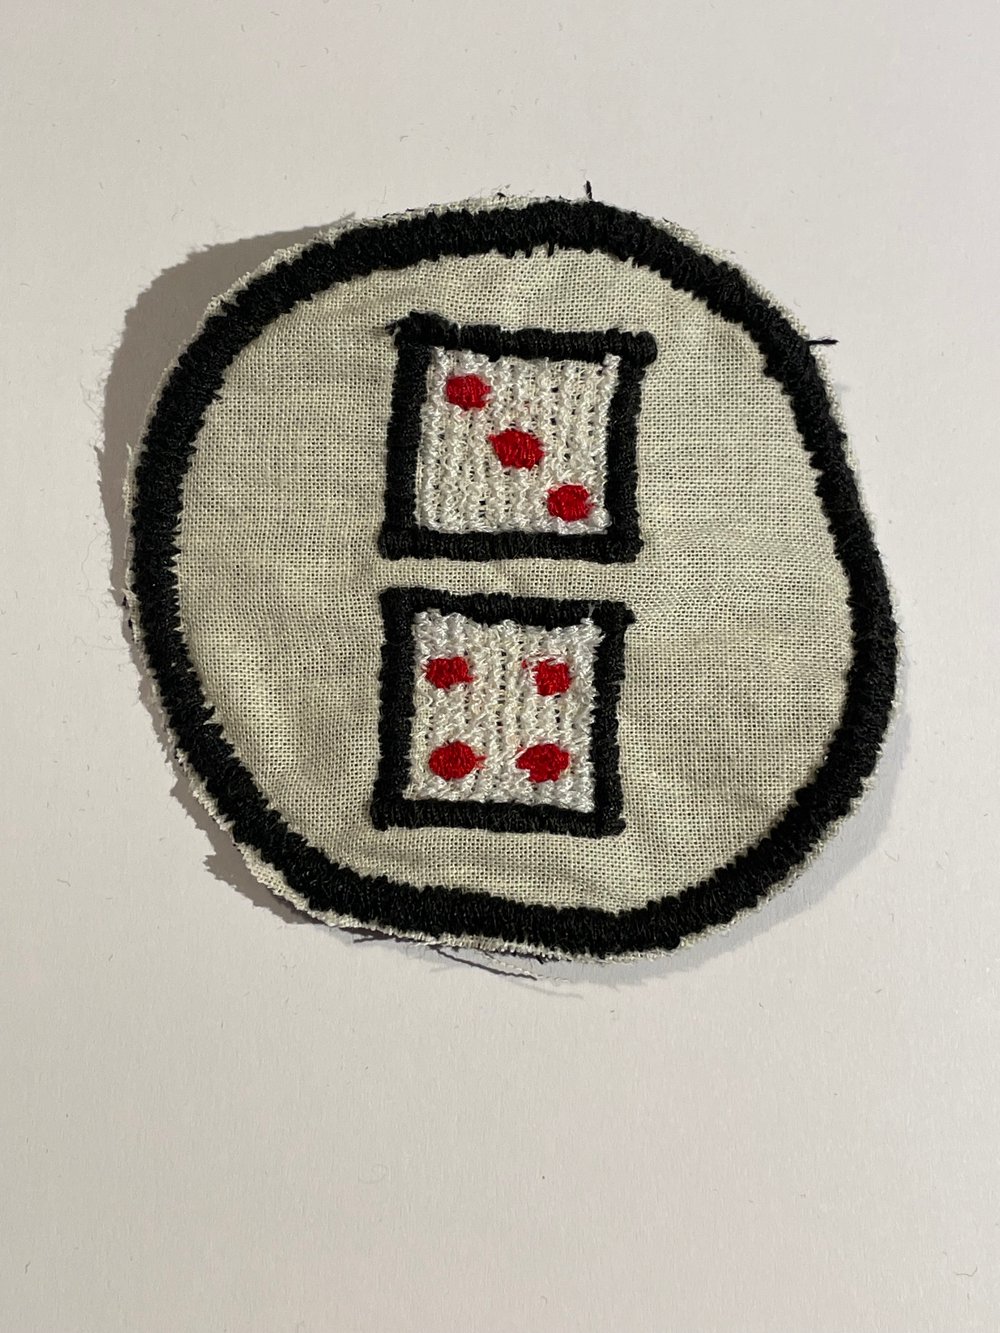 Image of Dice patch.